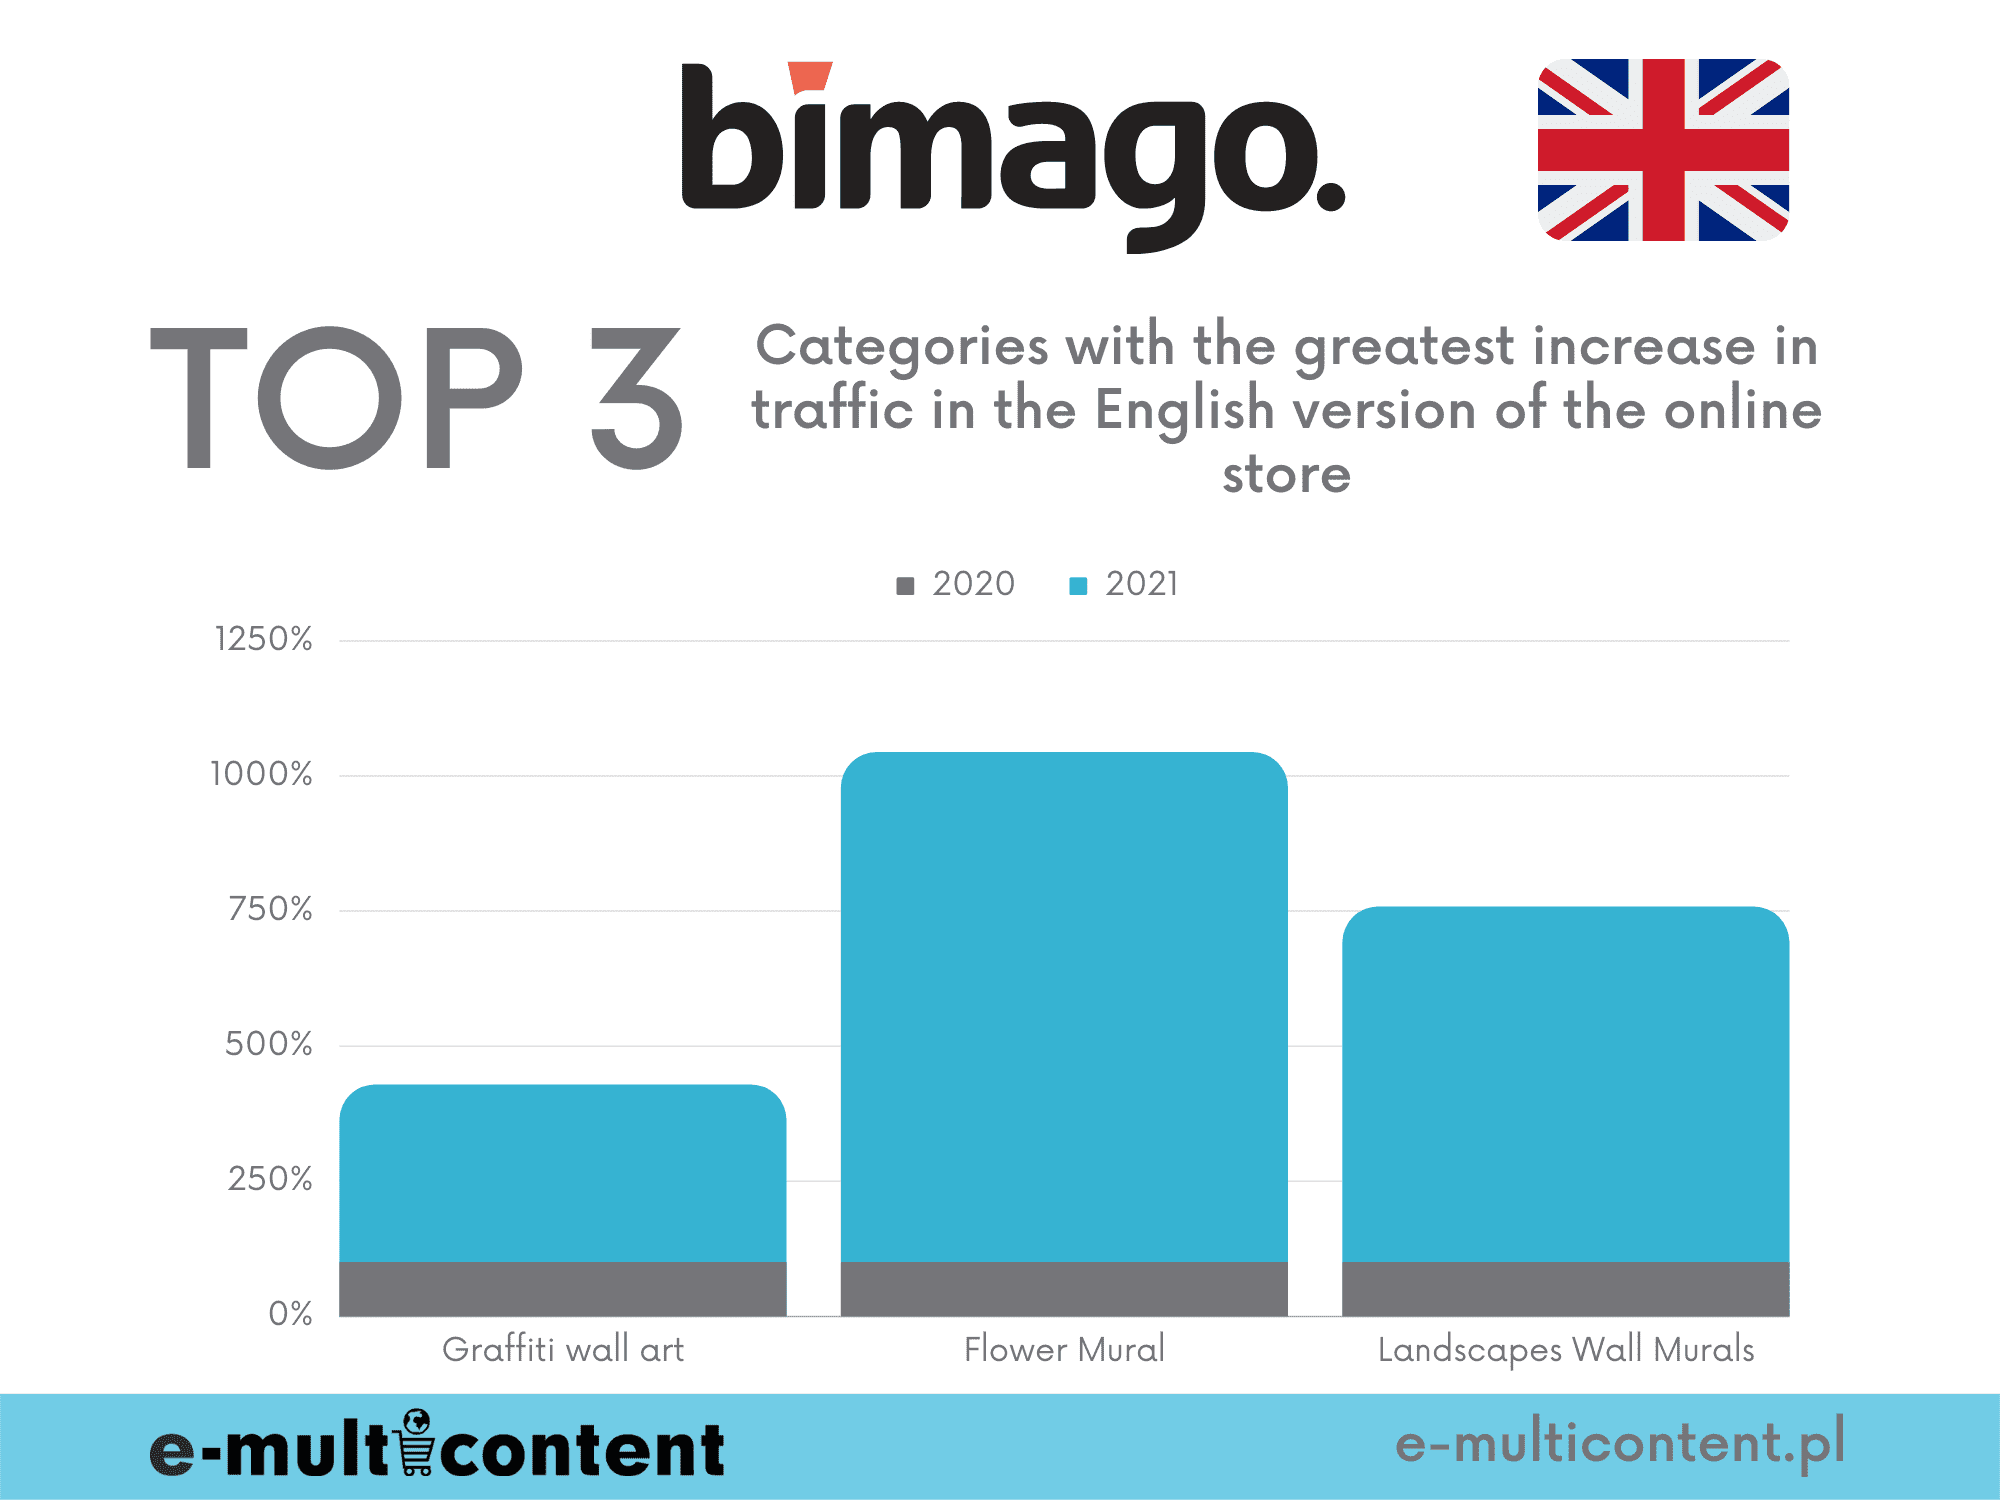 Categories with the highest increase in traffic - bimago.uk